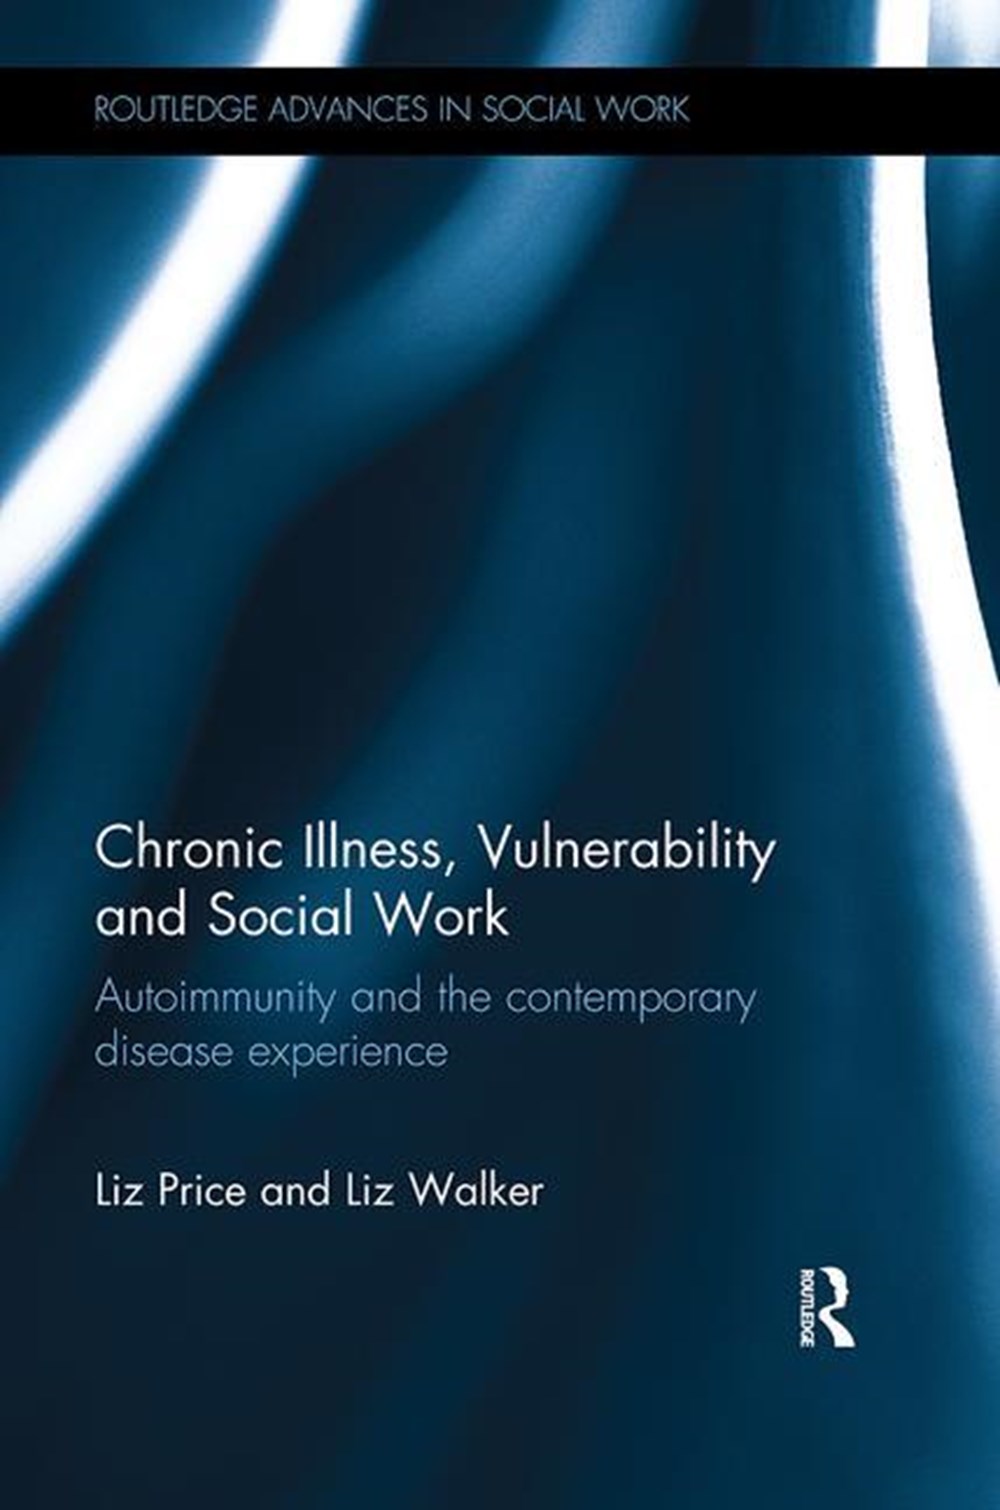 Chronic Illness, Vulnerability and Social Work: Autoimmunity and the Contemporary Disease Experience